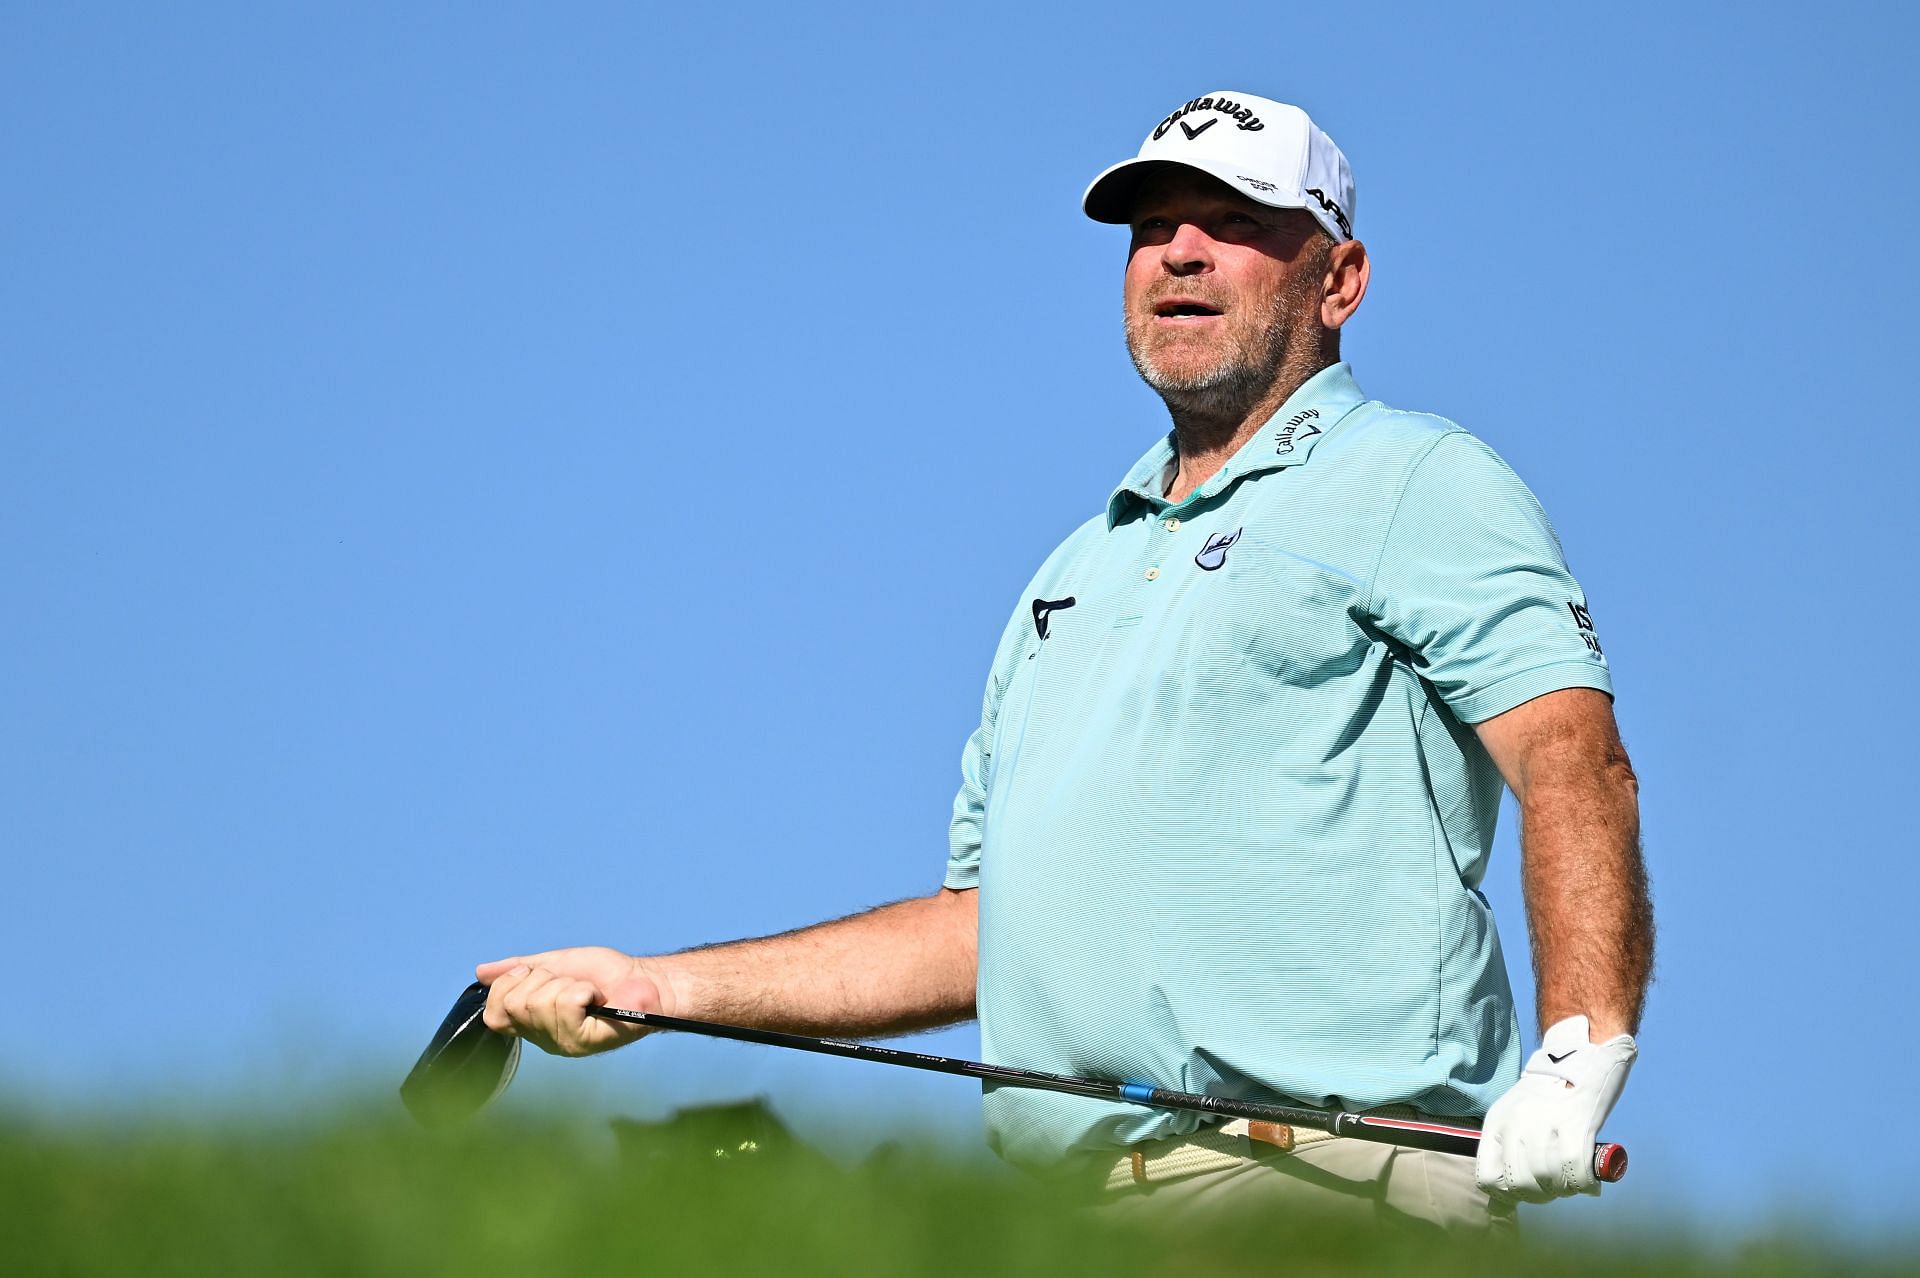 “I had to give it a go” - Thomas Bjorn likely to delay retirement from ...